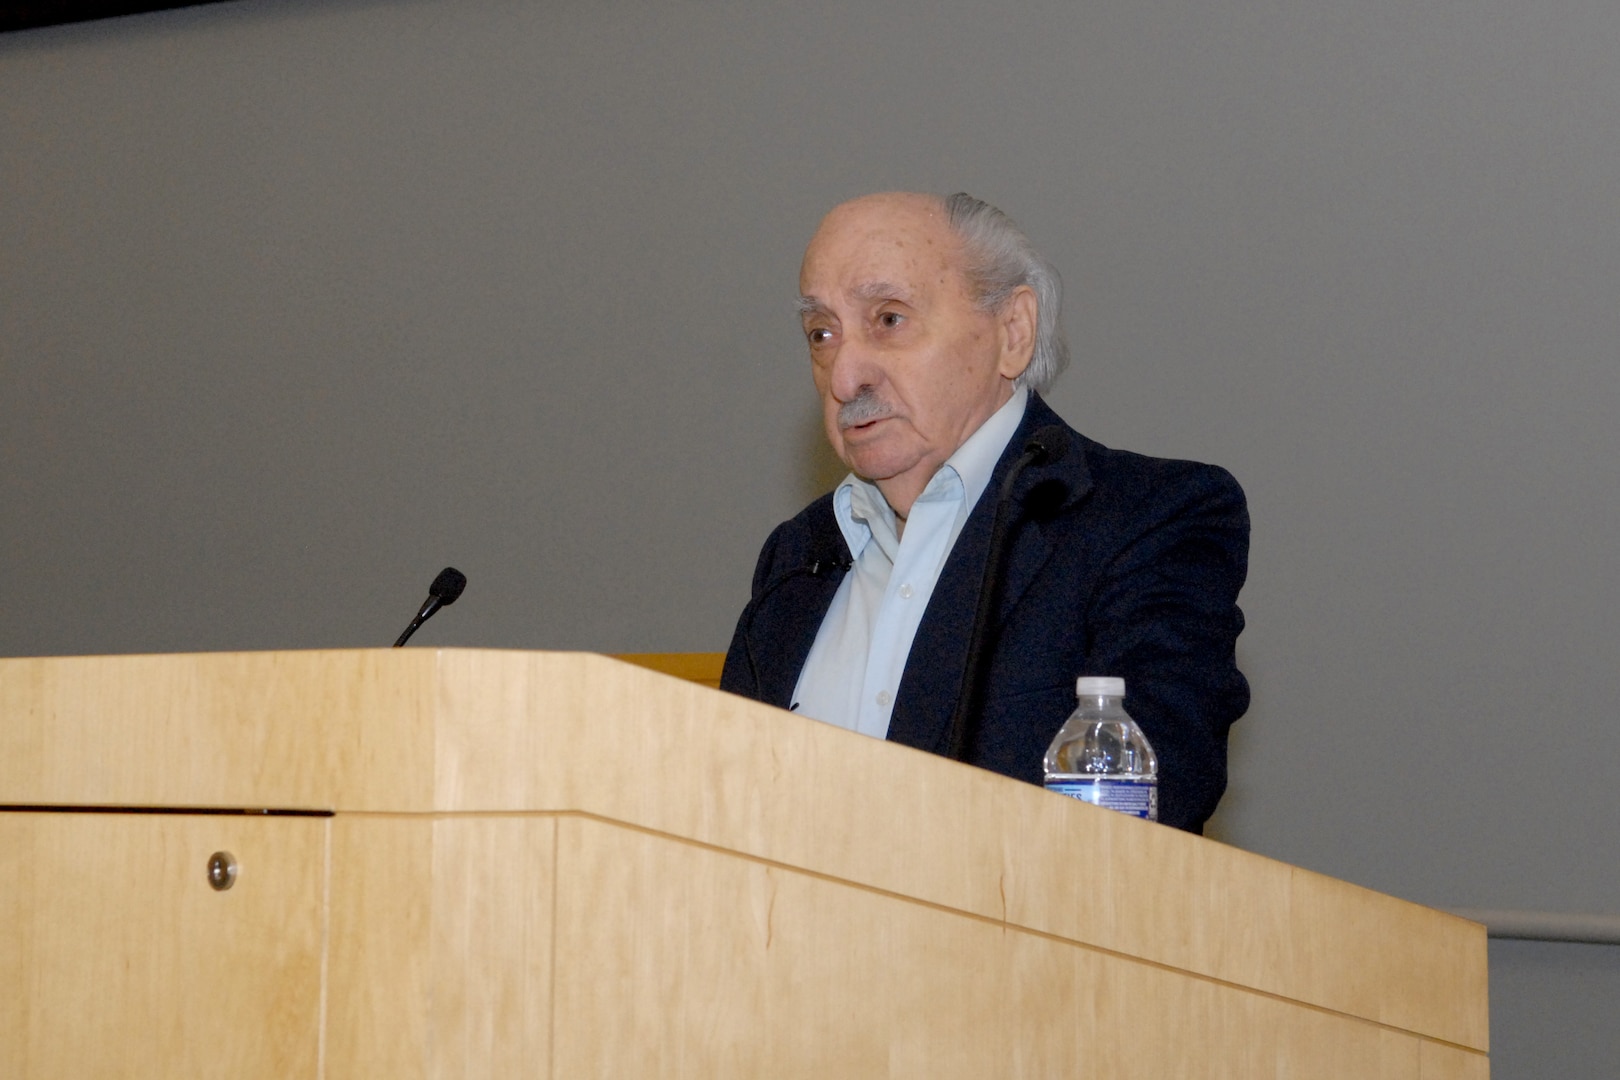 David Tuck, a Holocaust survivor, shares his personal story during the Holocaust Observance Program April 10 in Philadelphia. Tuck served as the keynote speaker for the event. (Photo by Ed Maldonado)